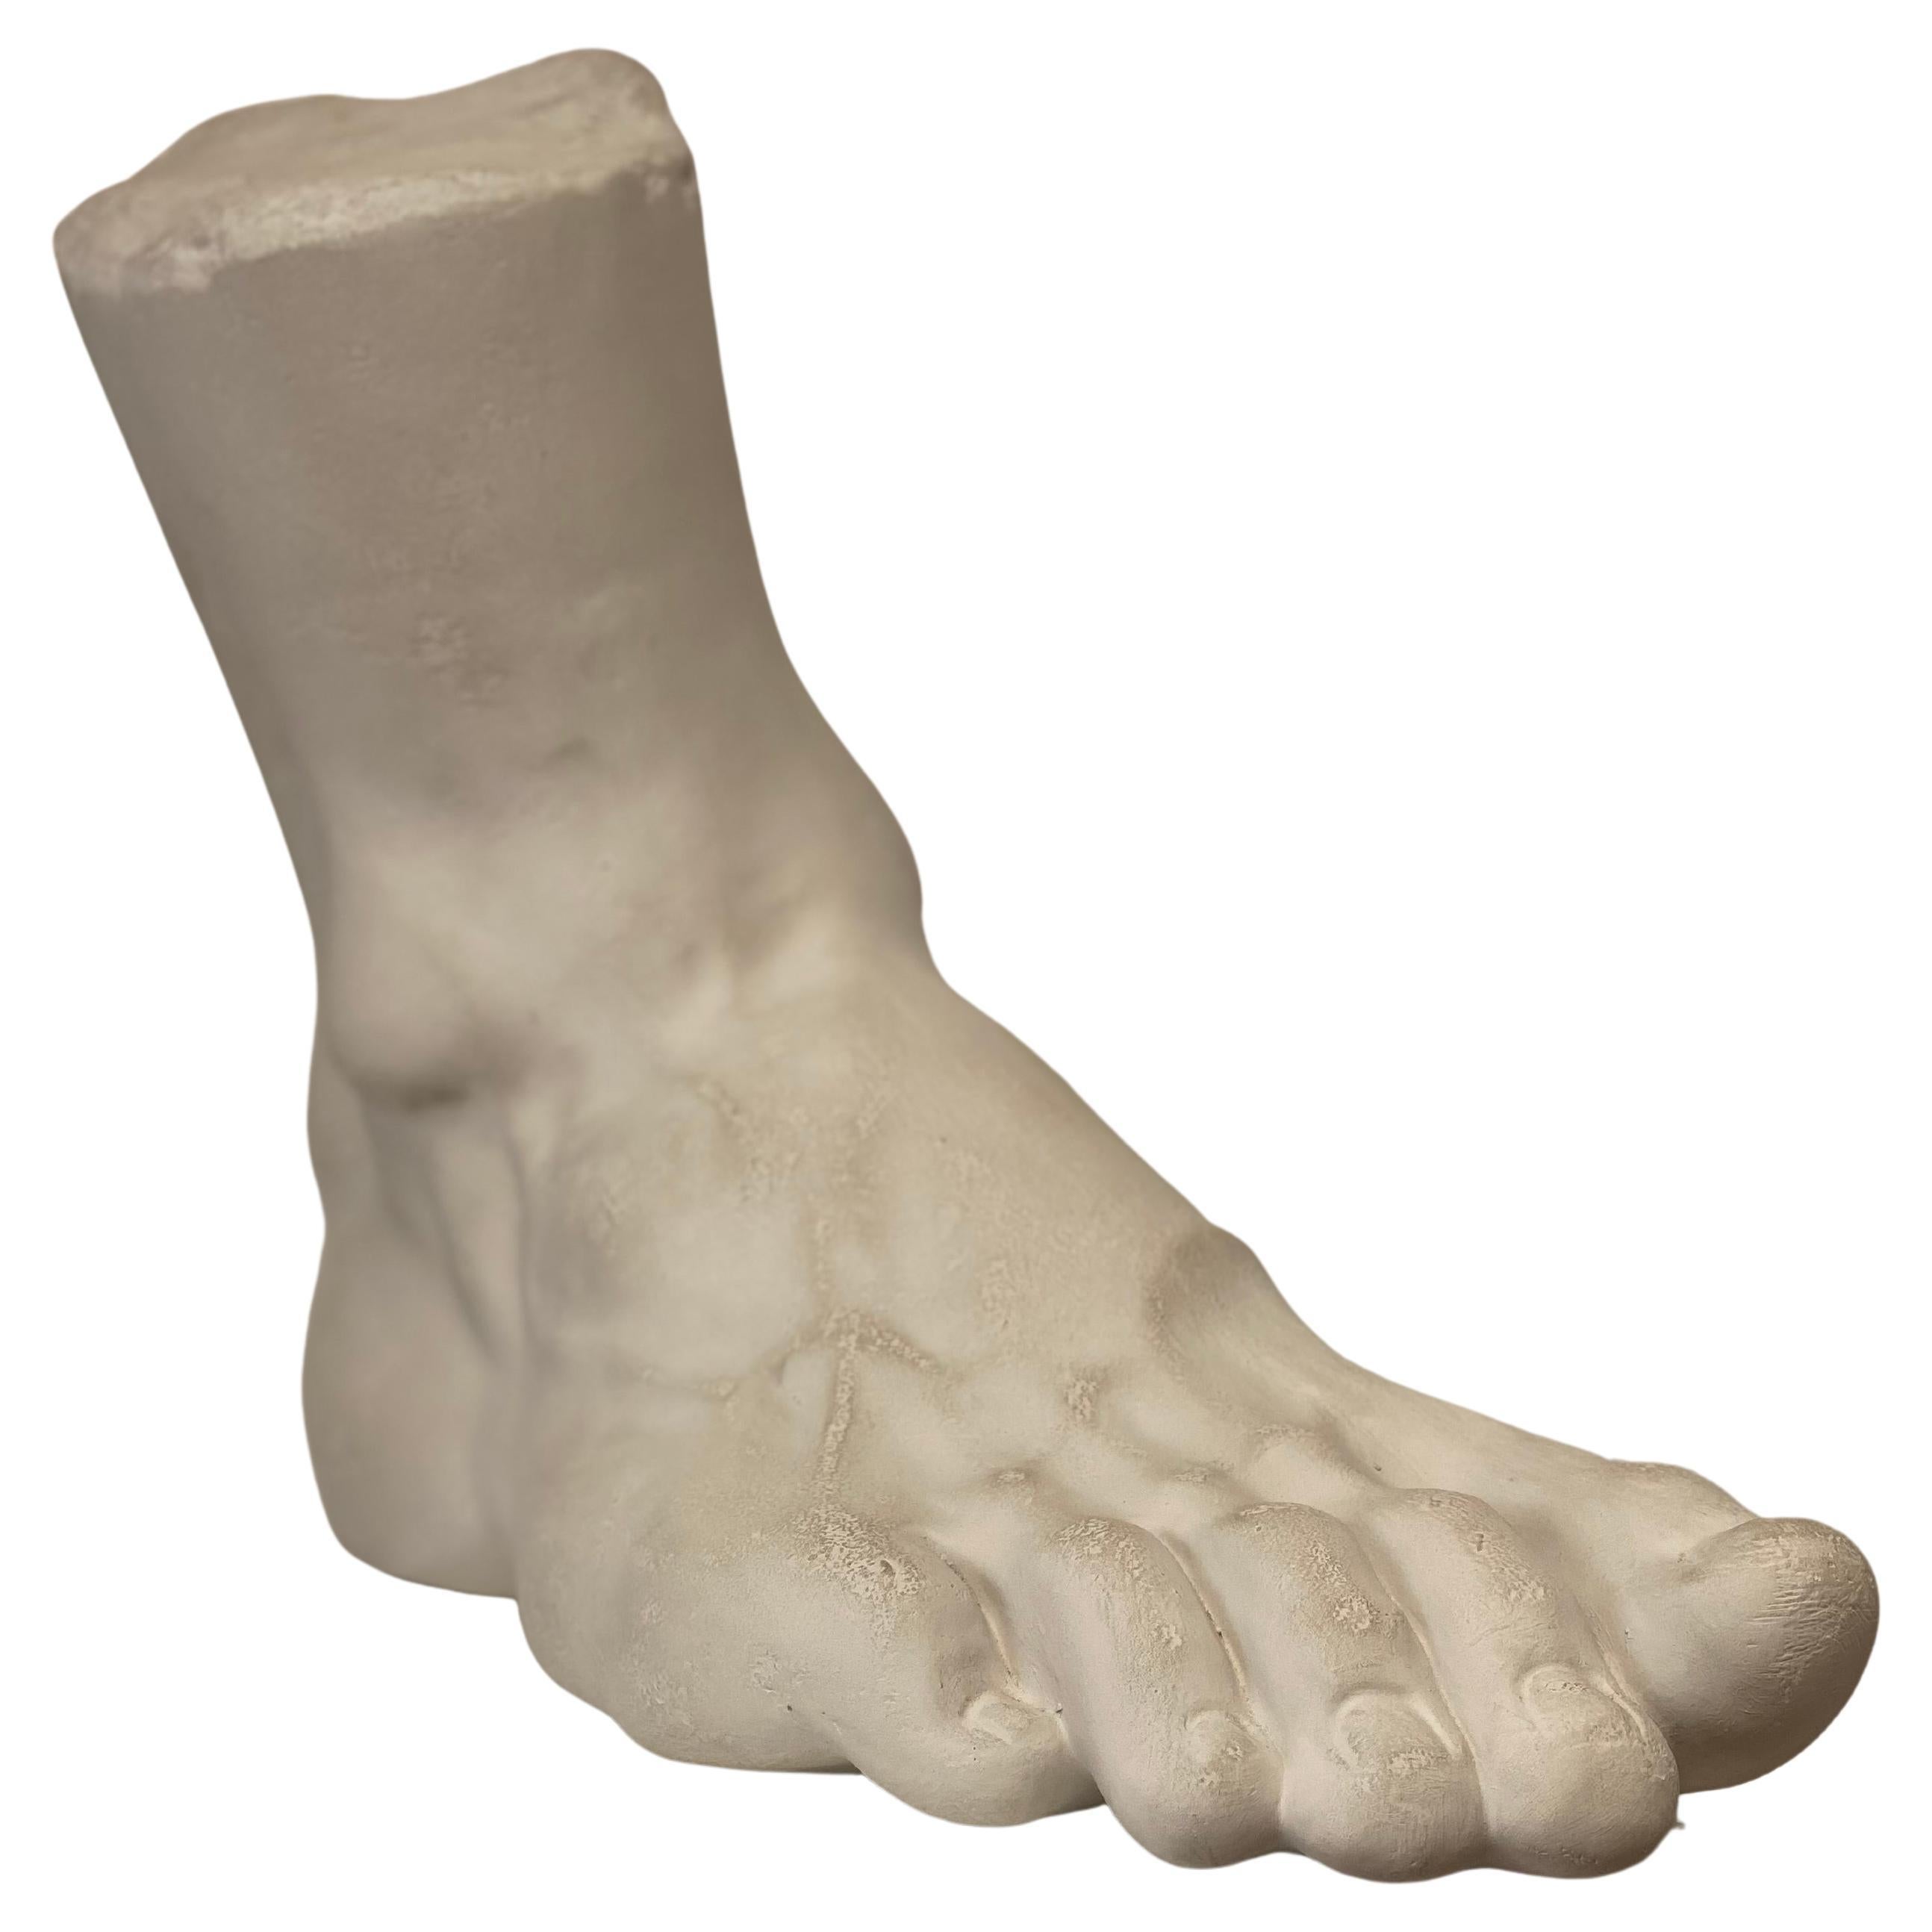 Decorative model of a Foot For Sale